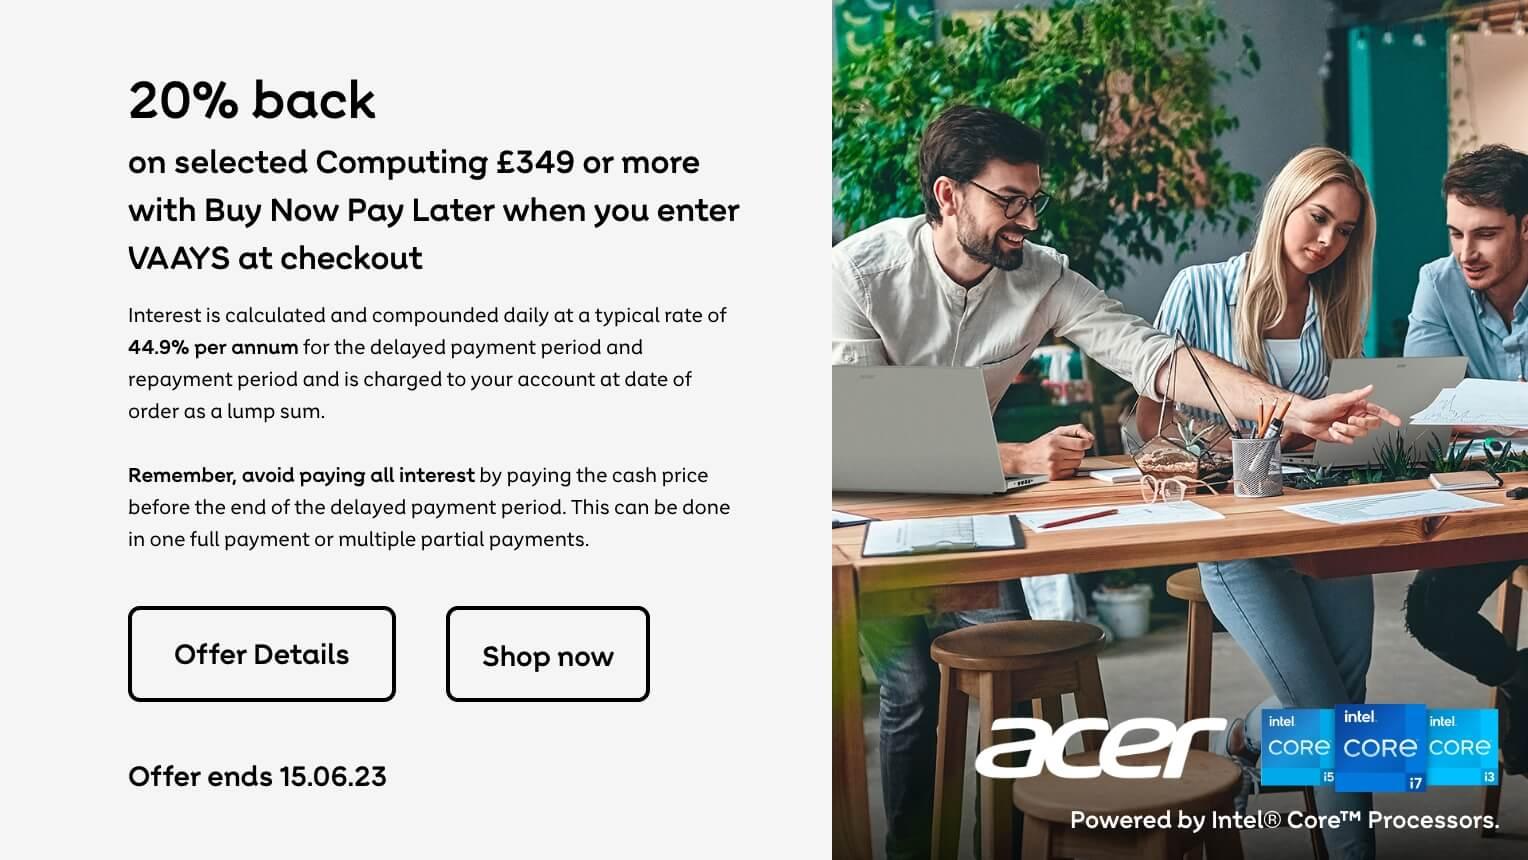 20% back on selected Computing products £349 or more on Buy Now Pay Later when you enter VAAYS at checkout. Offer Ends 15.06.23.